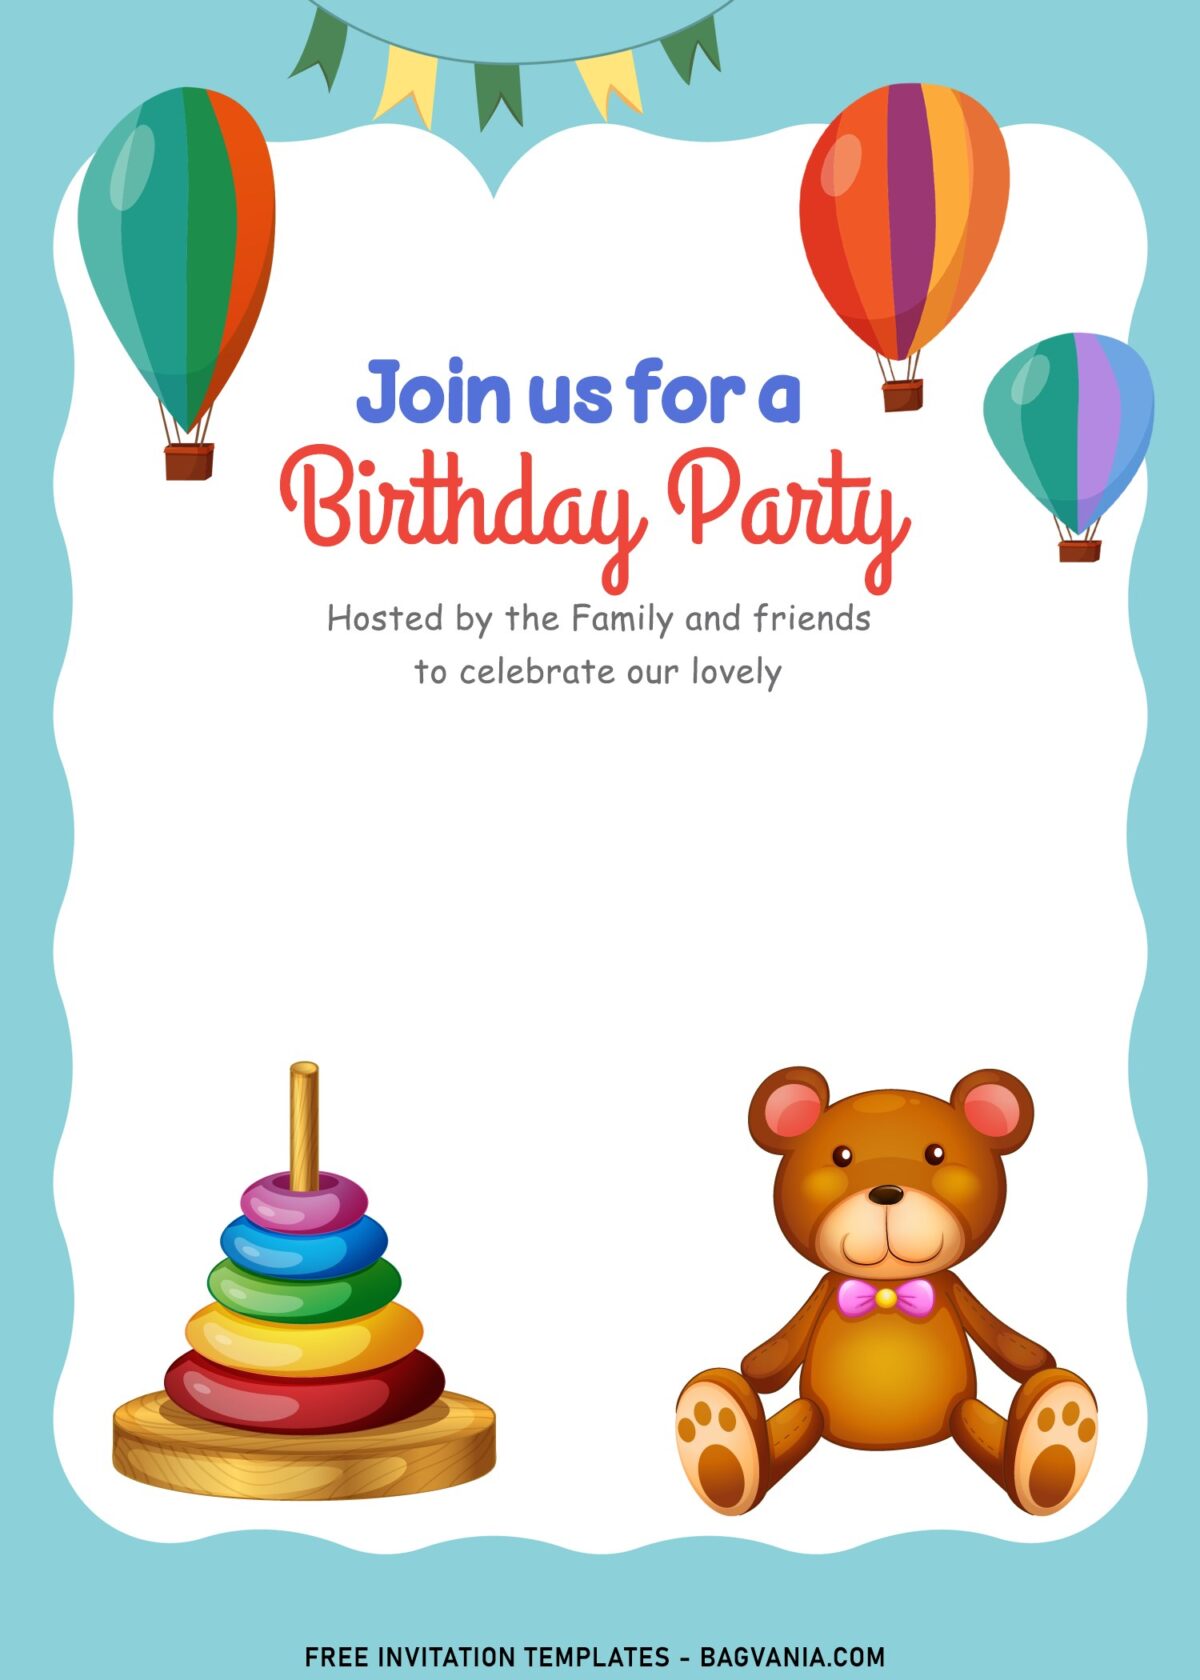 10+ Best And Cute Birthday Invitation Templates For Preschooler with colorful ring stacks